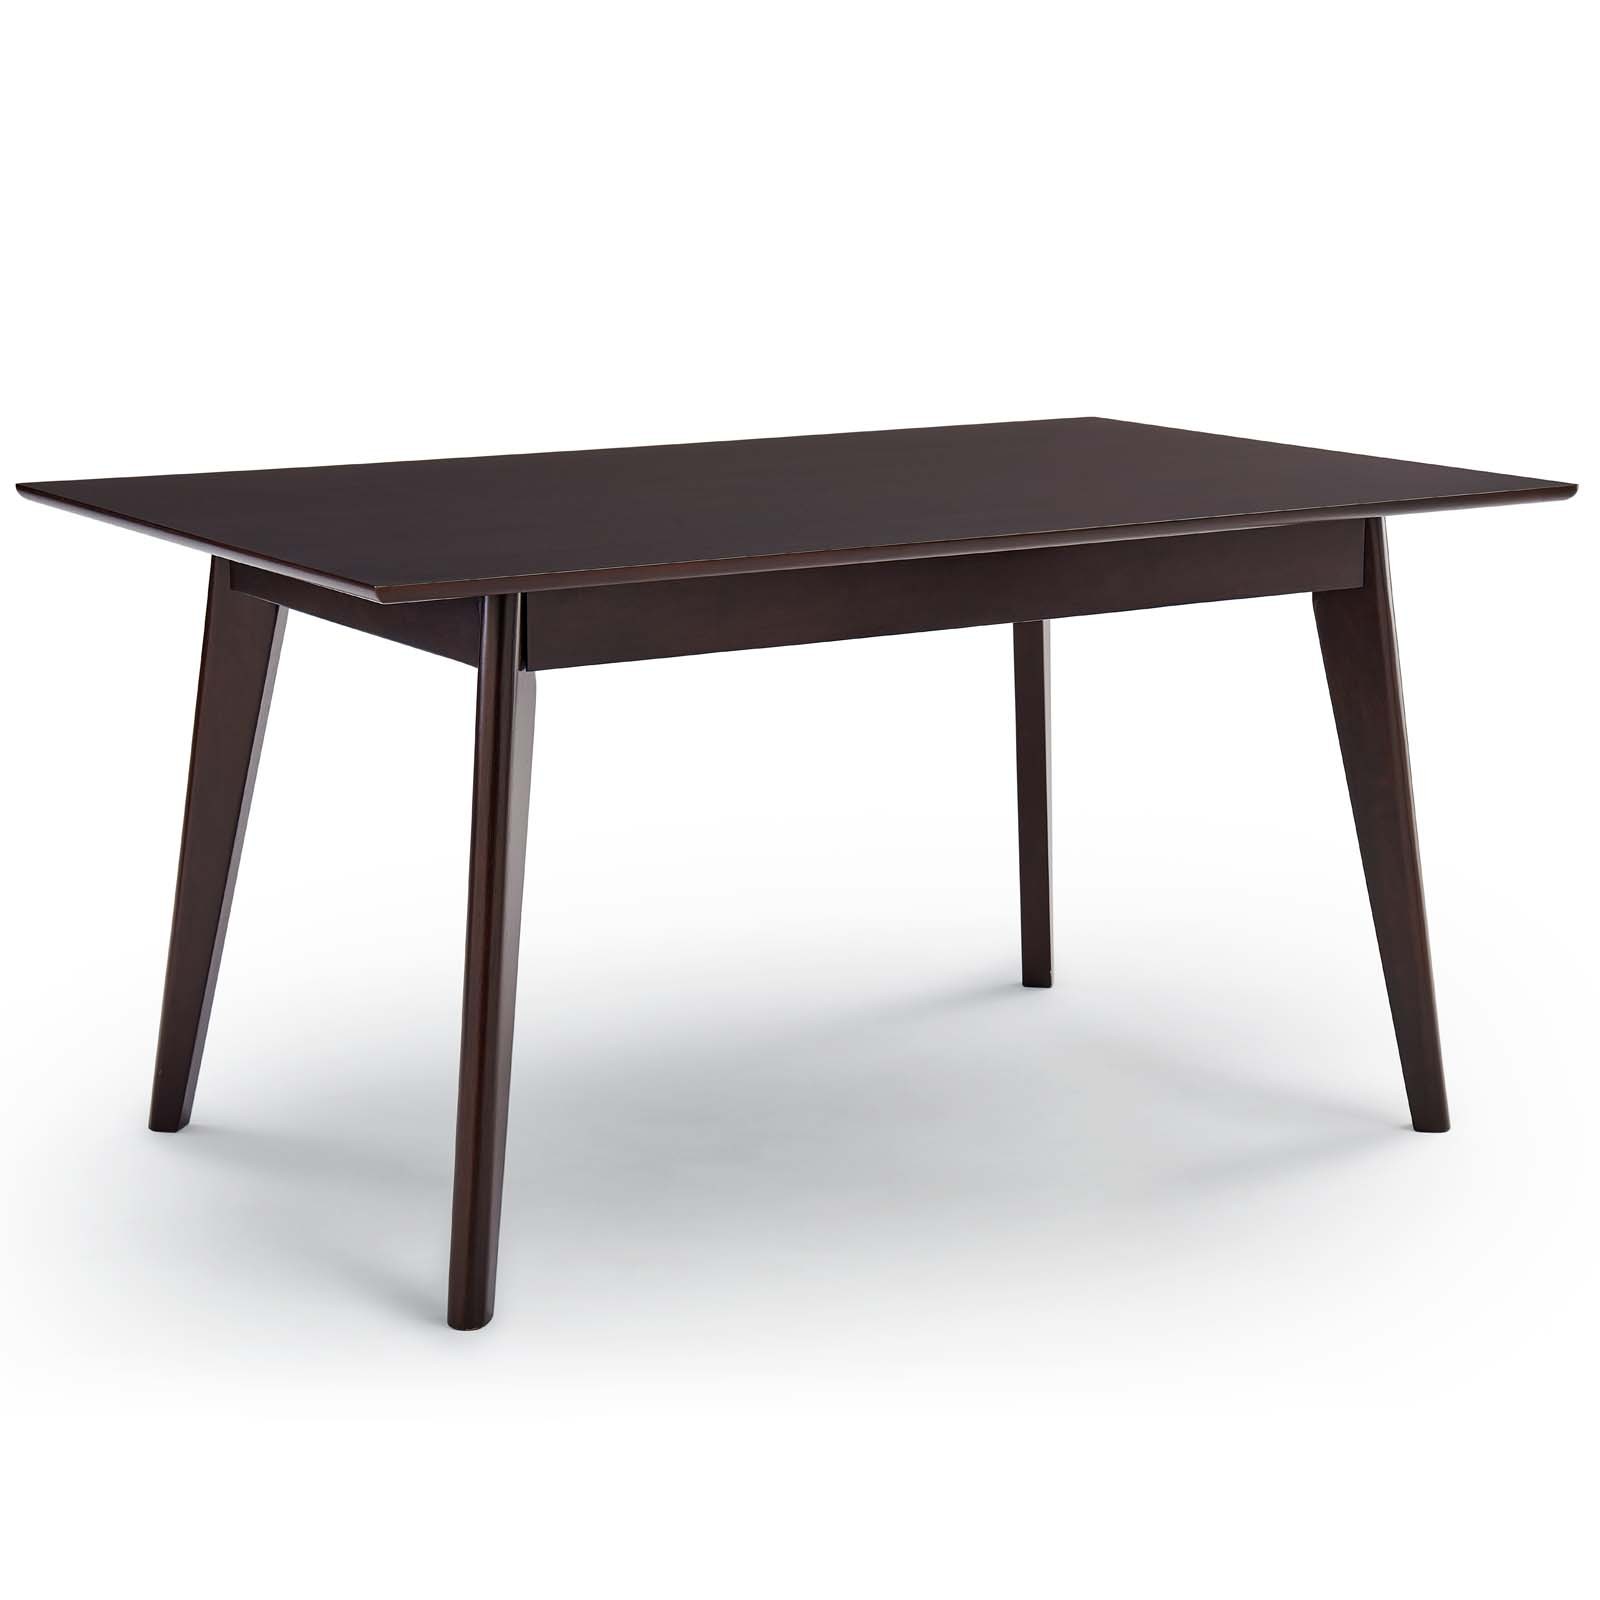 Oracle 59 Inch Rectangle Dining Table in Cappuccino